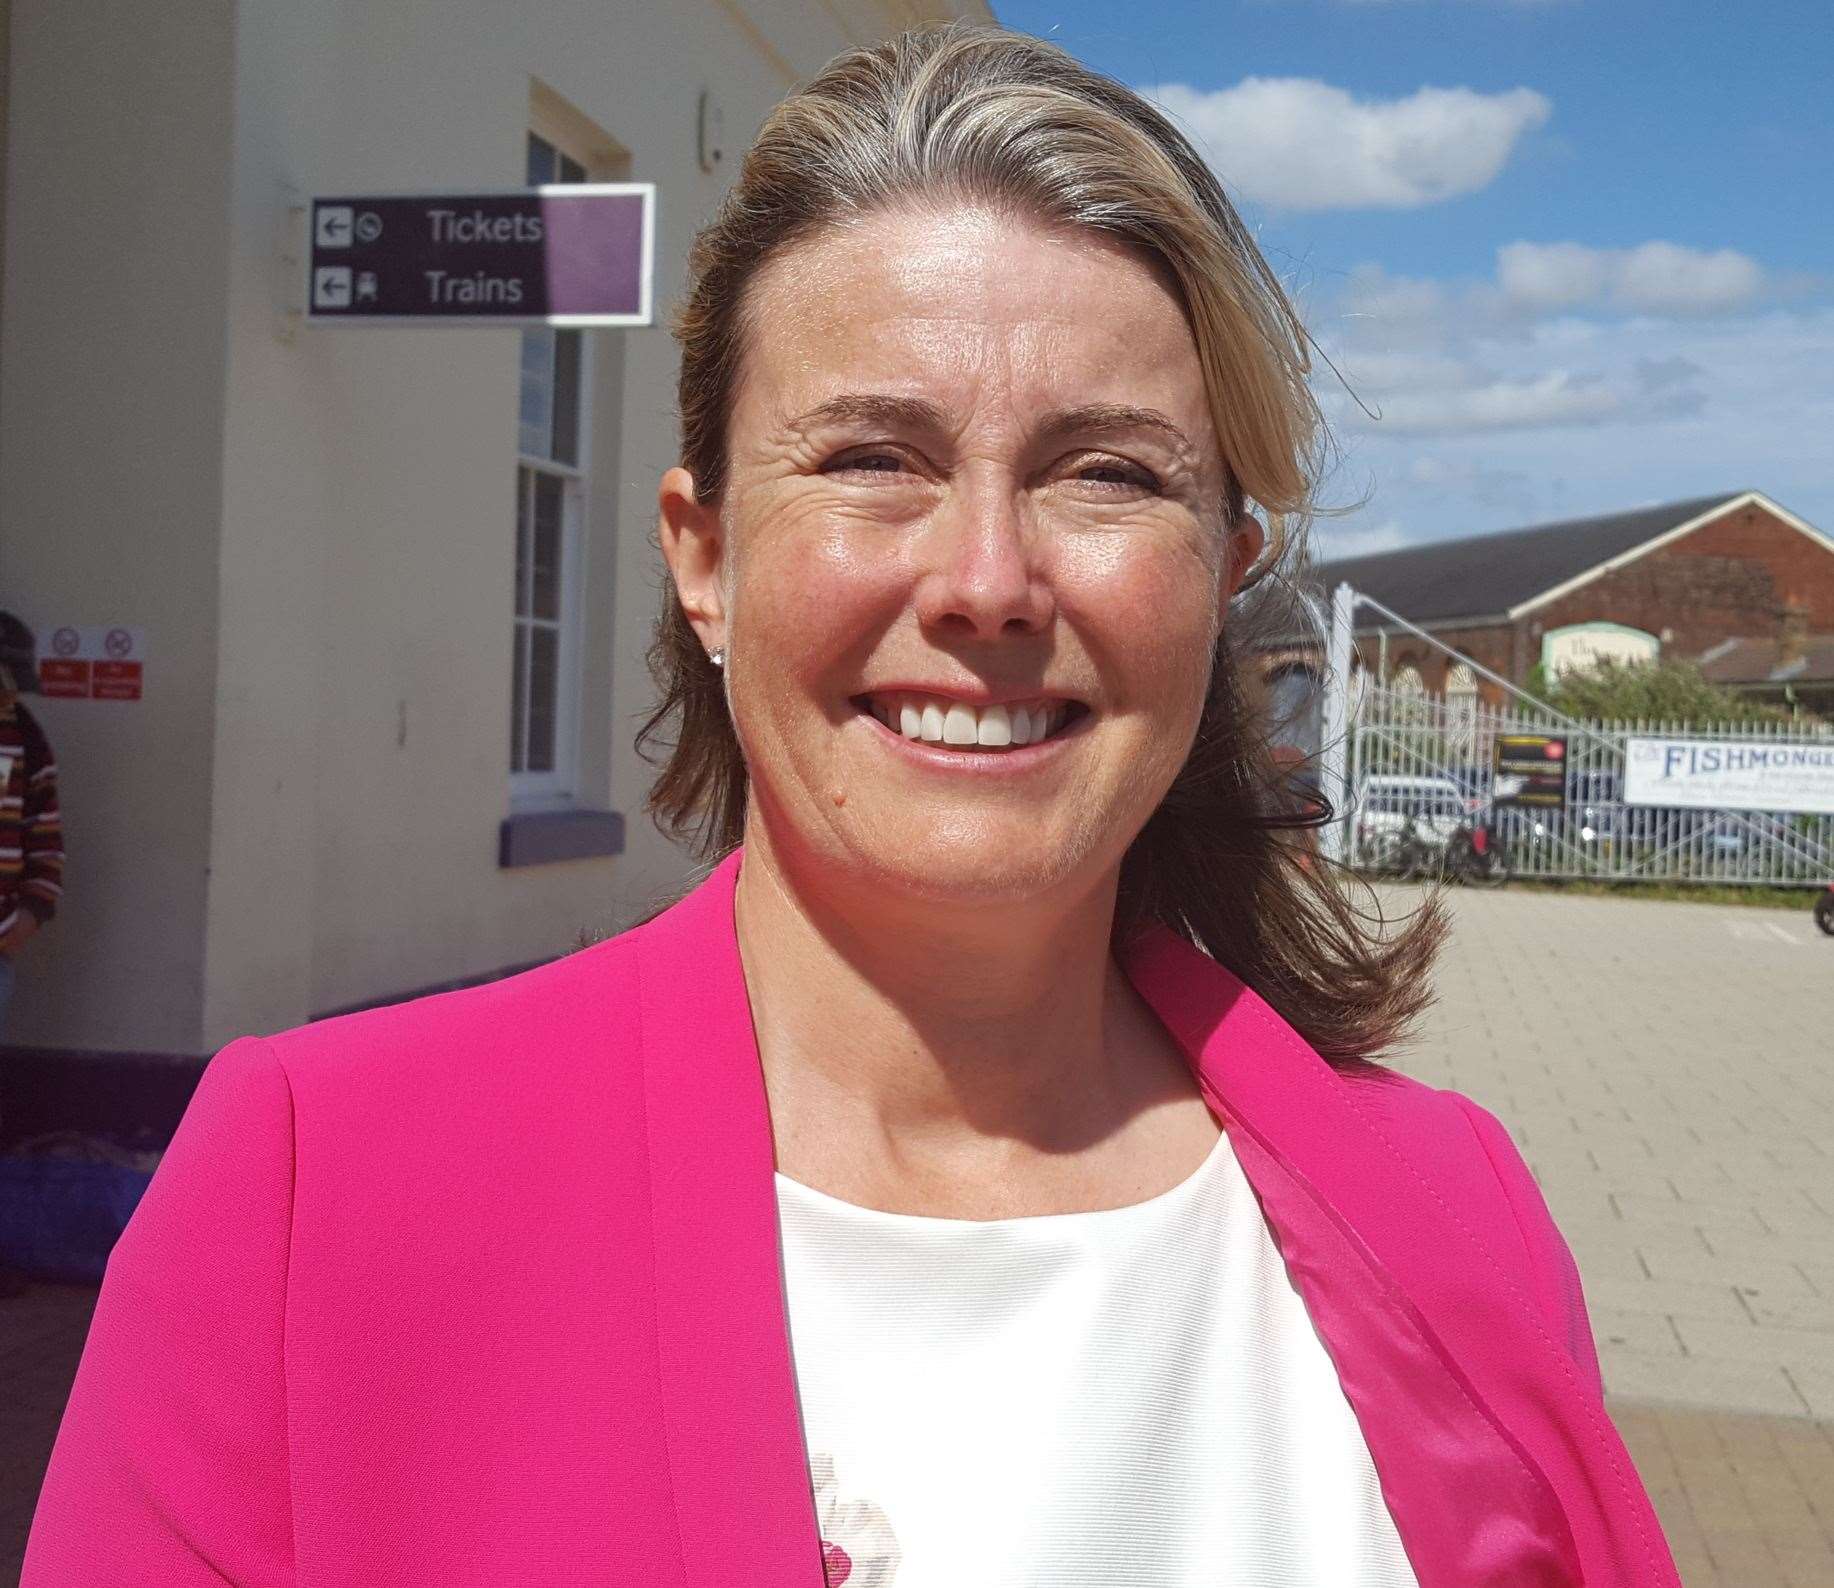 Anna Firth said if she gets elected she is "absolutely going to deliver" a town constable.